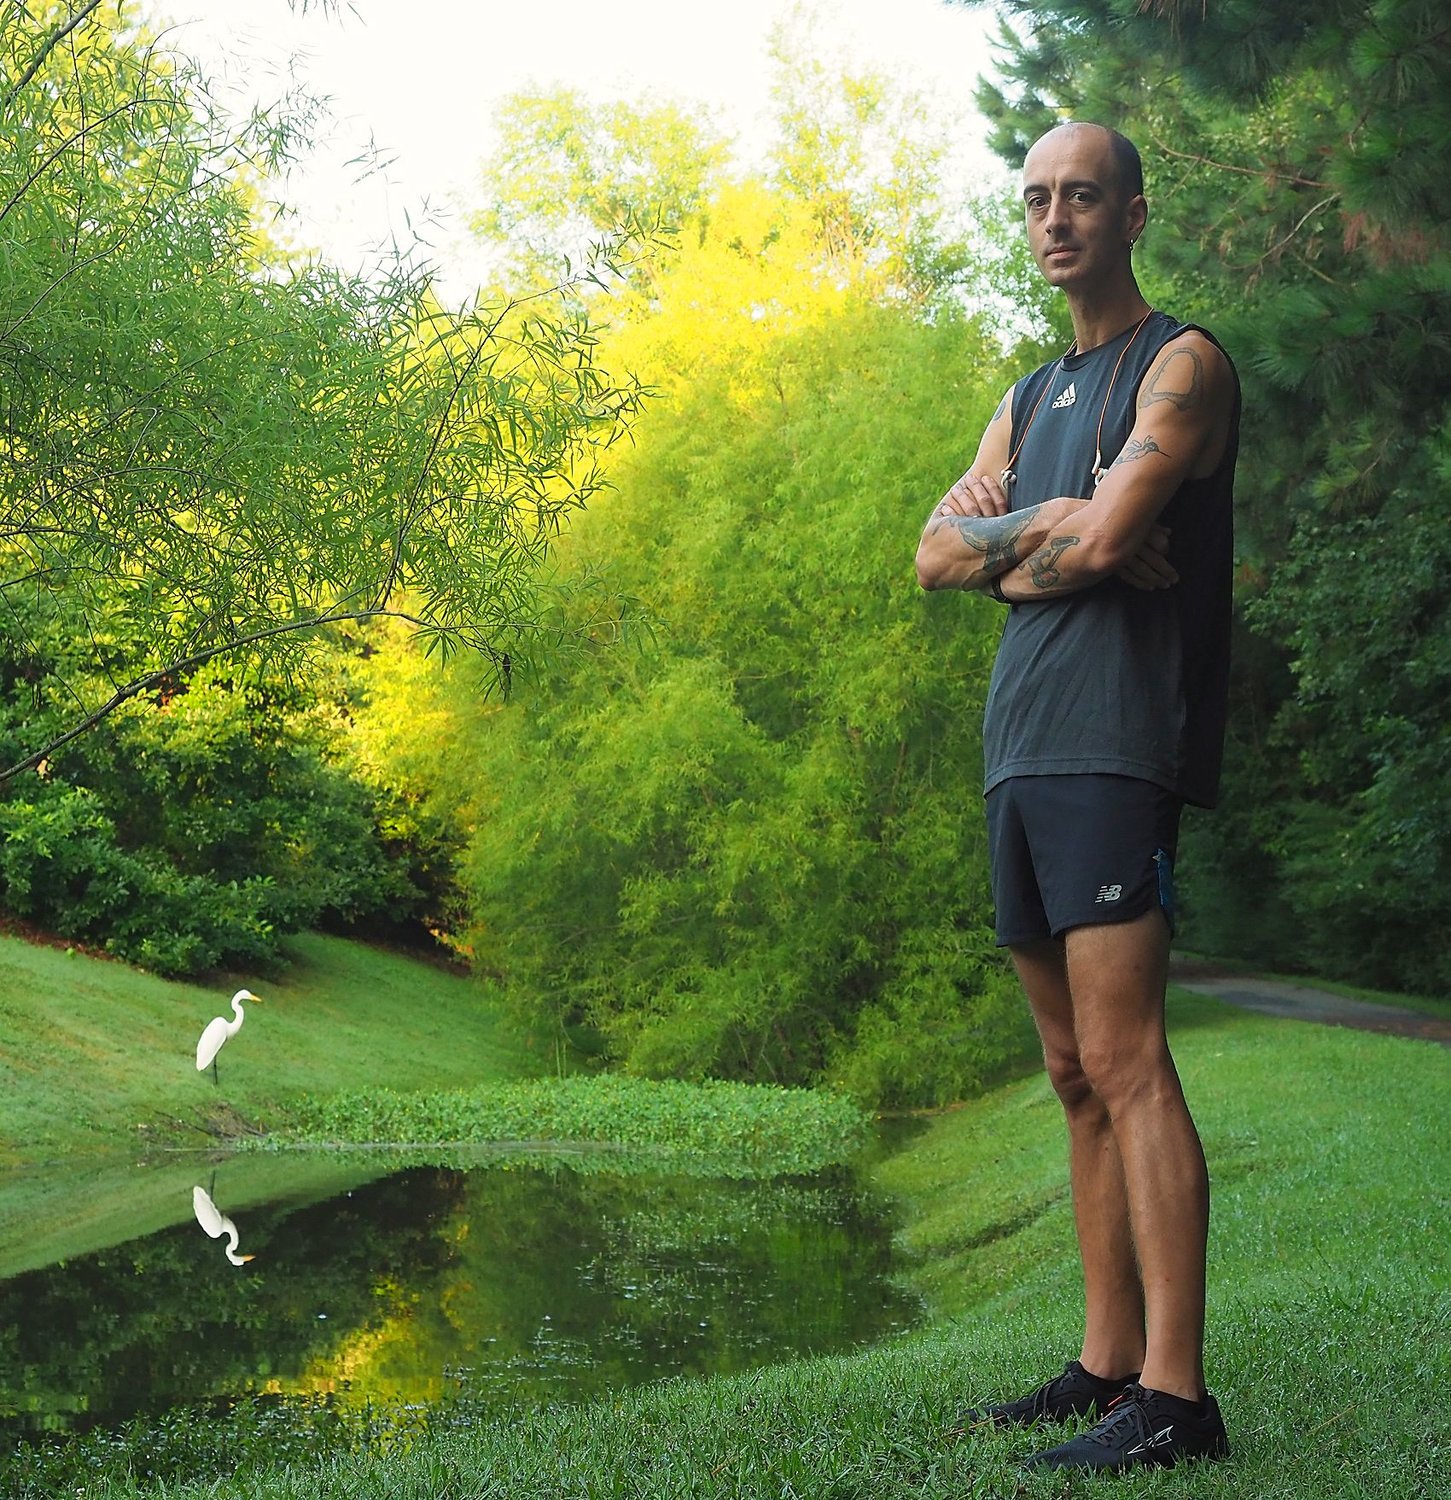 Pittsboro runner and chronic lymphocytic leukemia survivor Corbie Hill
poses near CCCC’s Pittsboro campus, where he begins most of his near-daily
running workouts. Hill’s leukemia reappeared in May